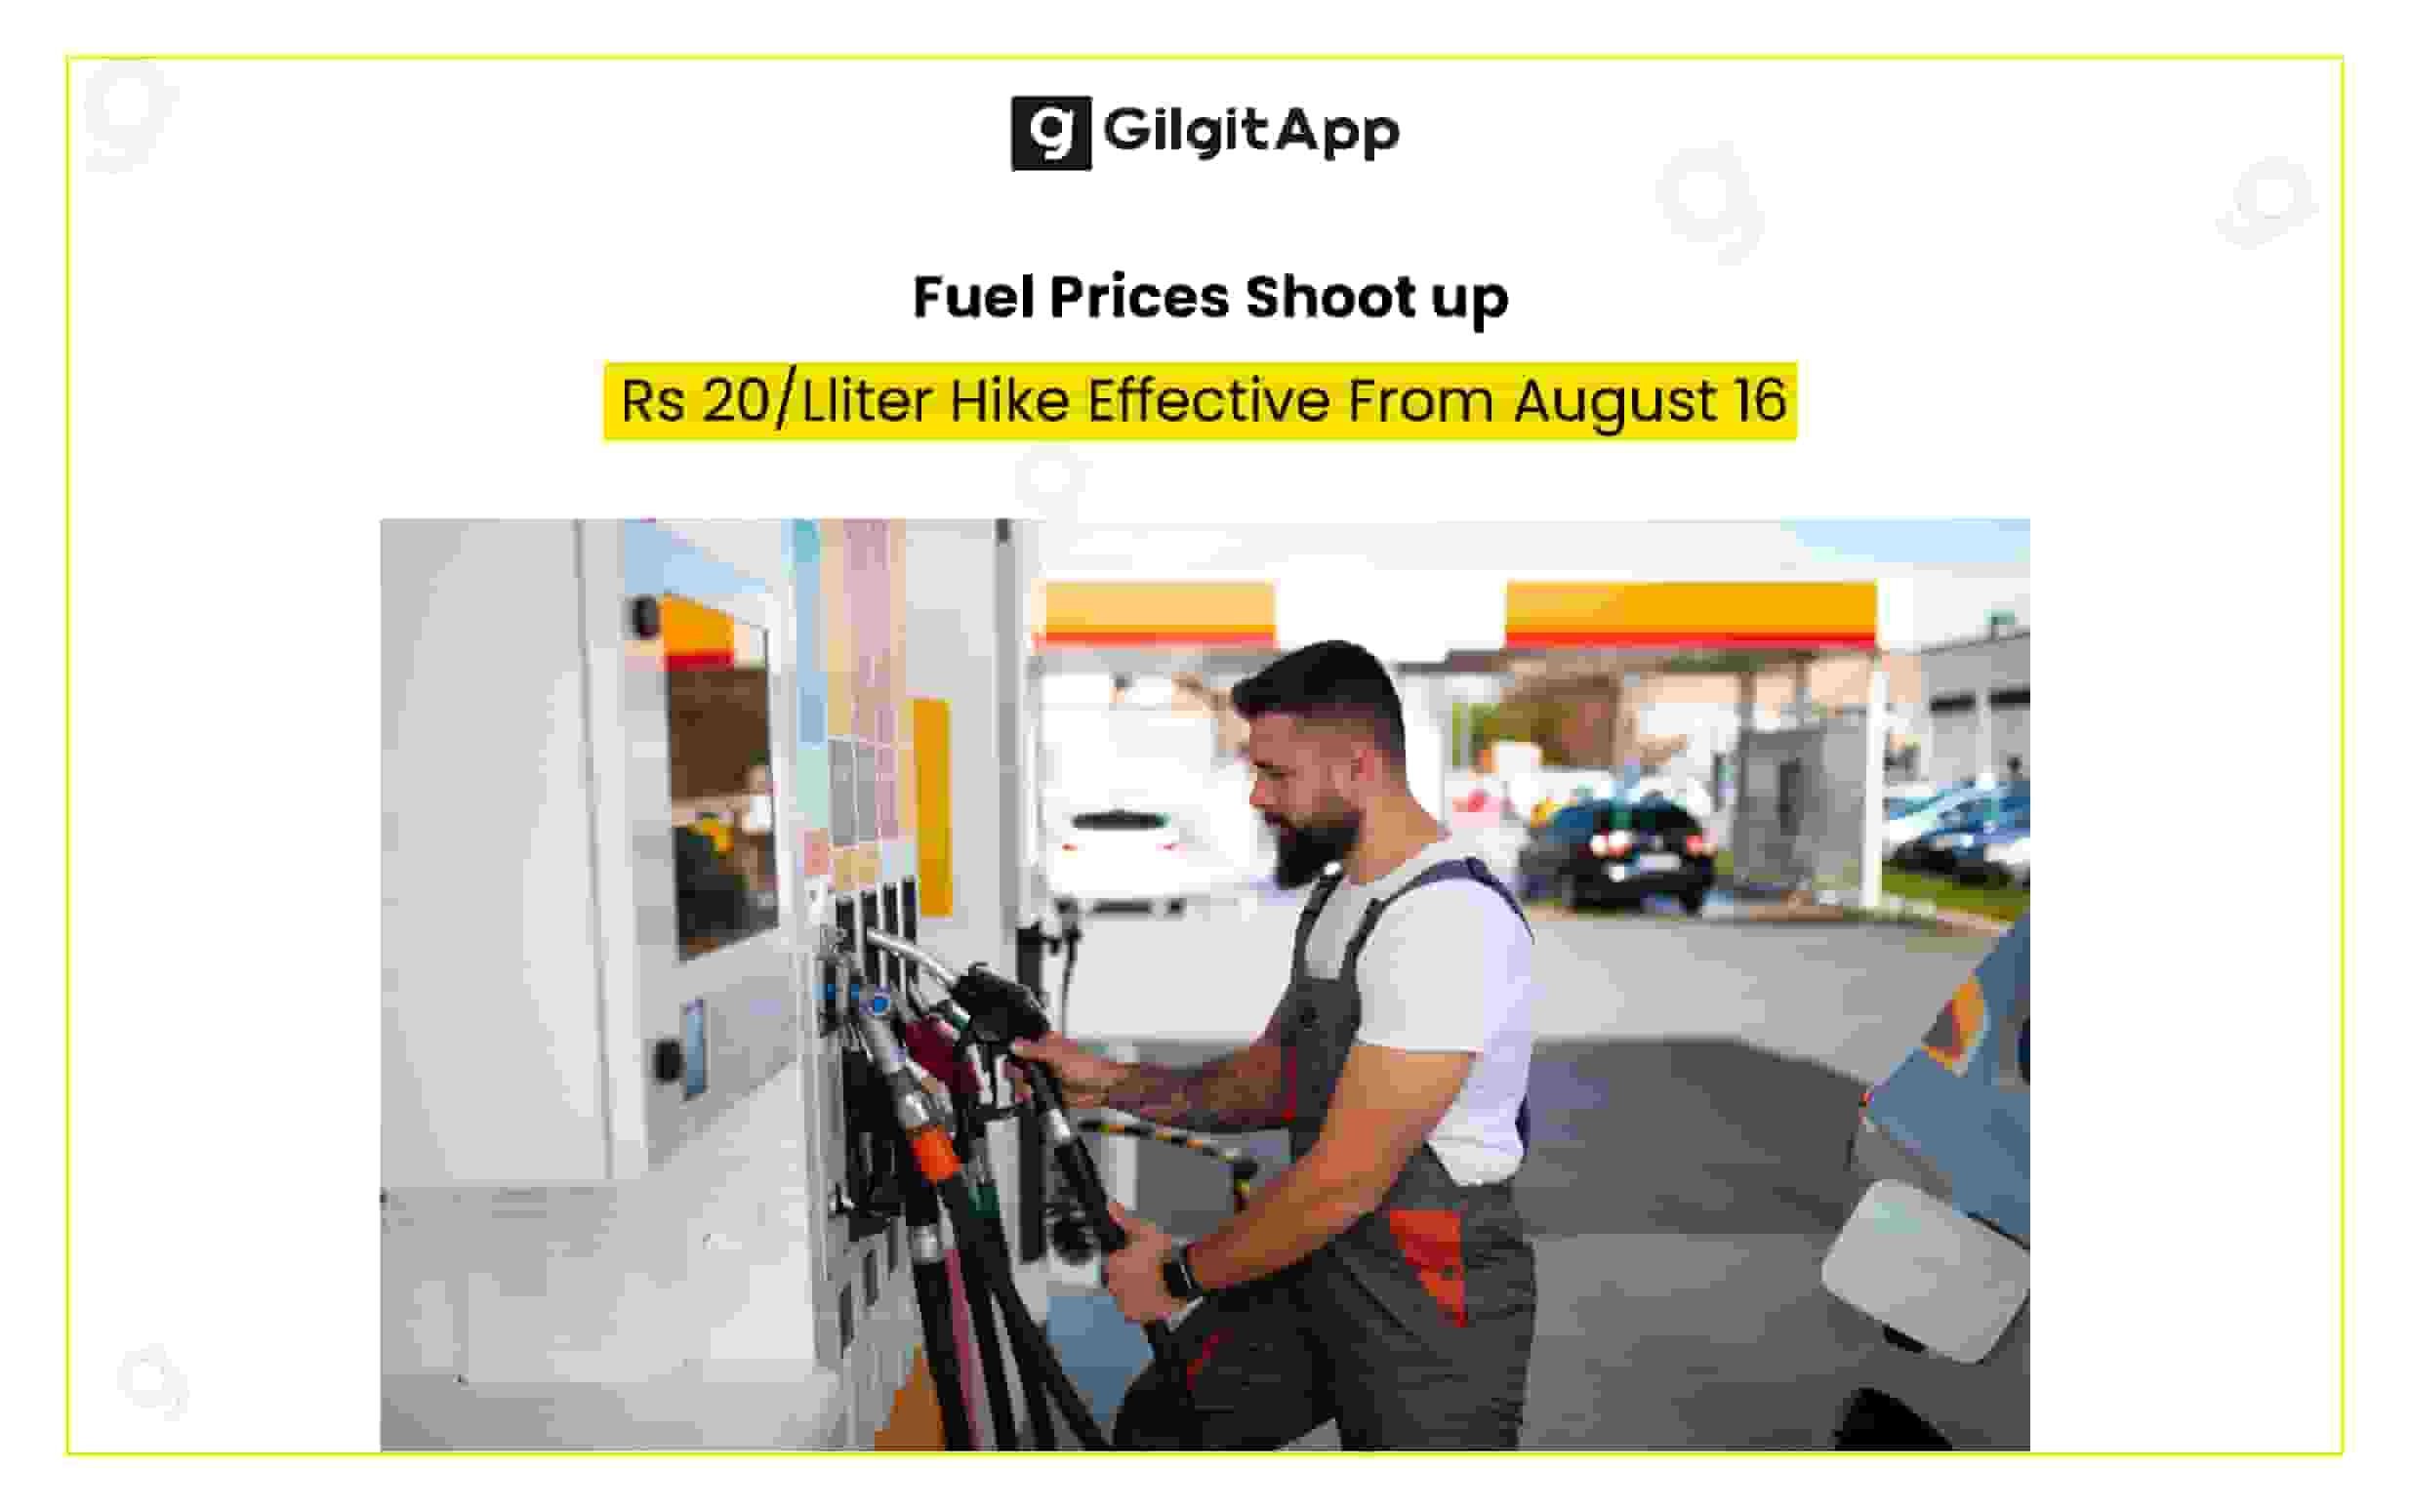 Fuel Prices Shoot up Rs 20/Lliter Hike Effective From August 16